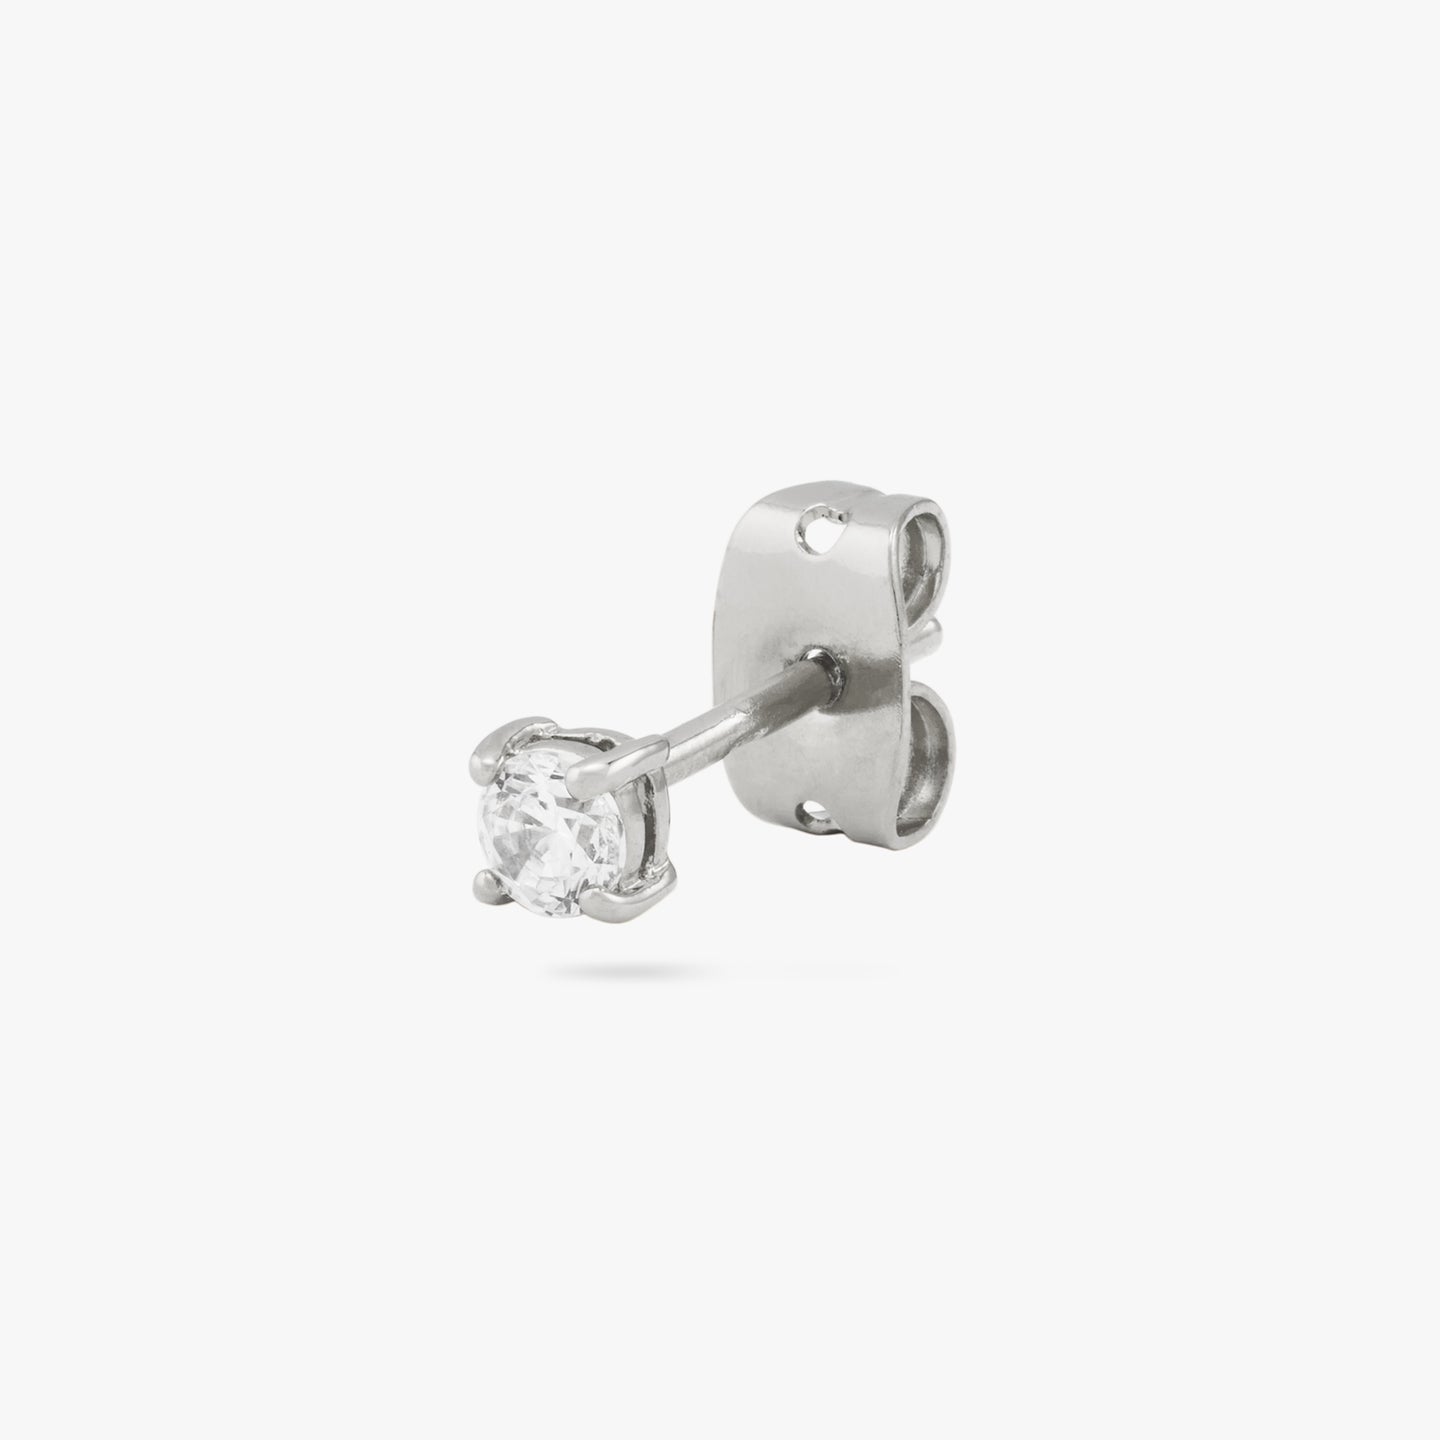 This is a small silver stud with a clear cz accent color:null|silver/clear